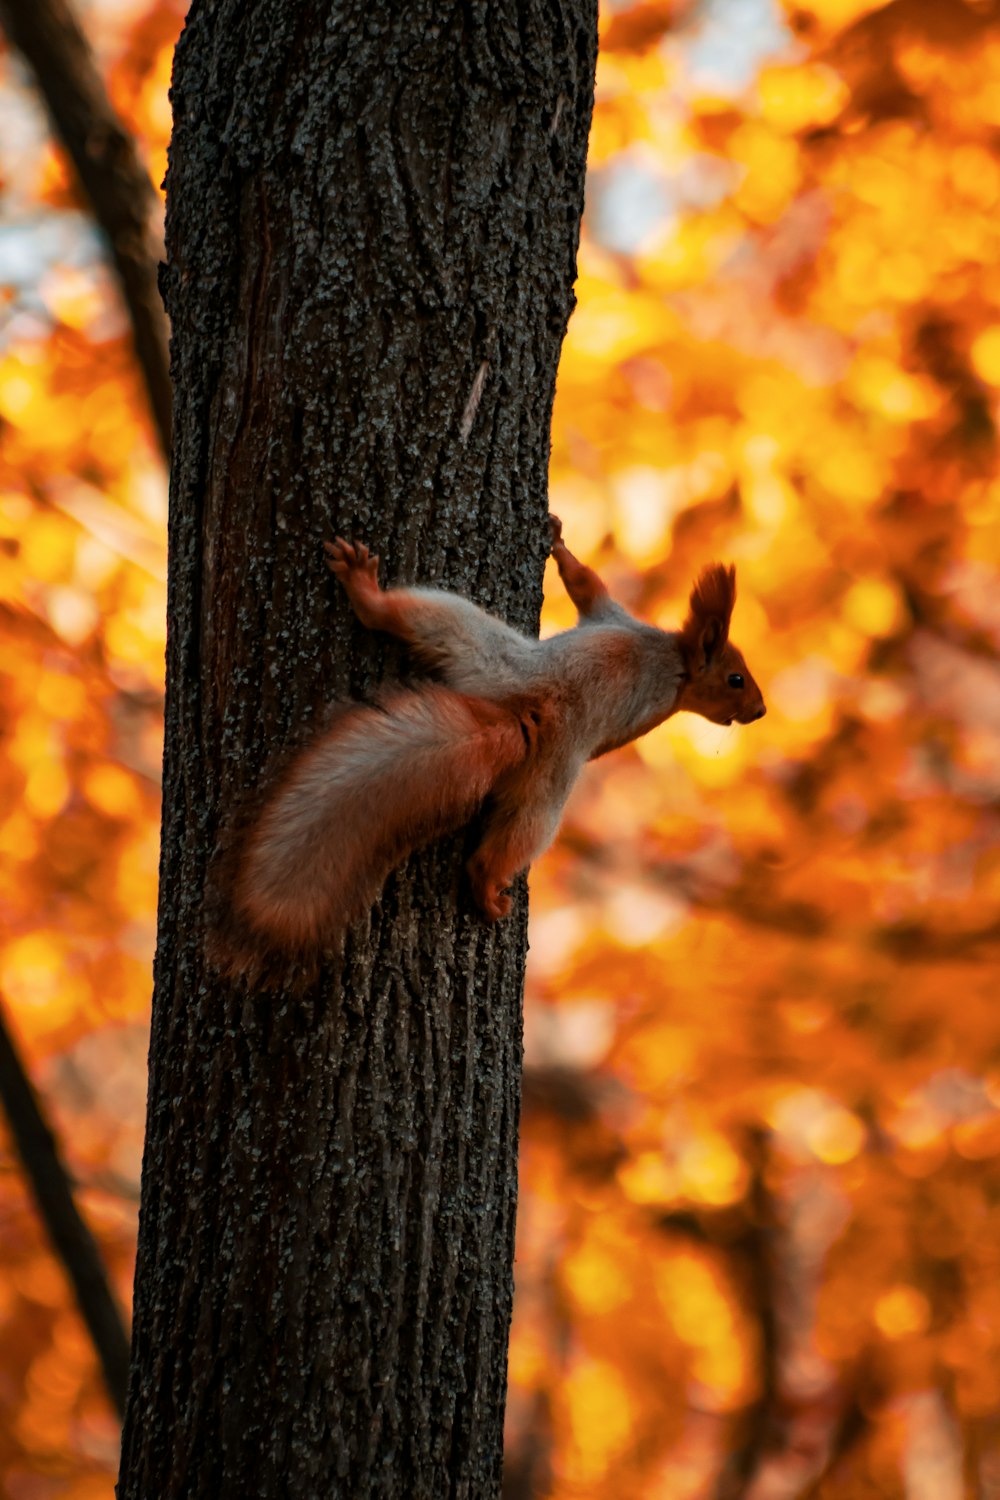 a squirrel climbing up the side of a tree